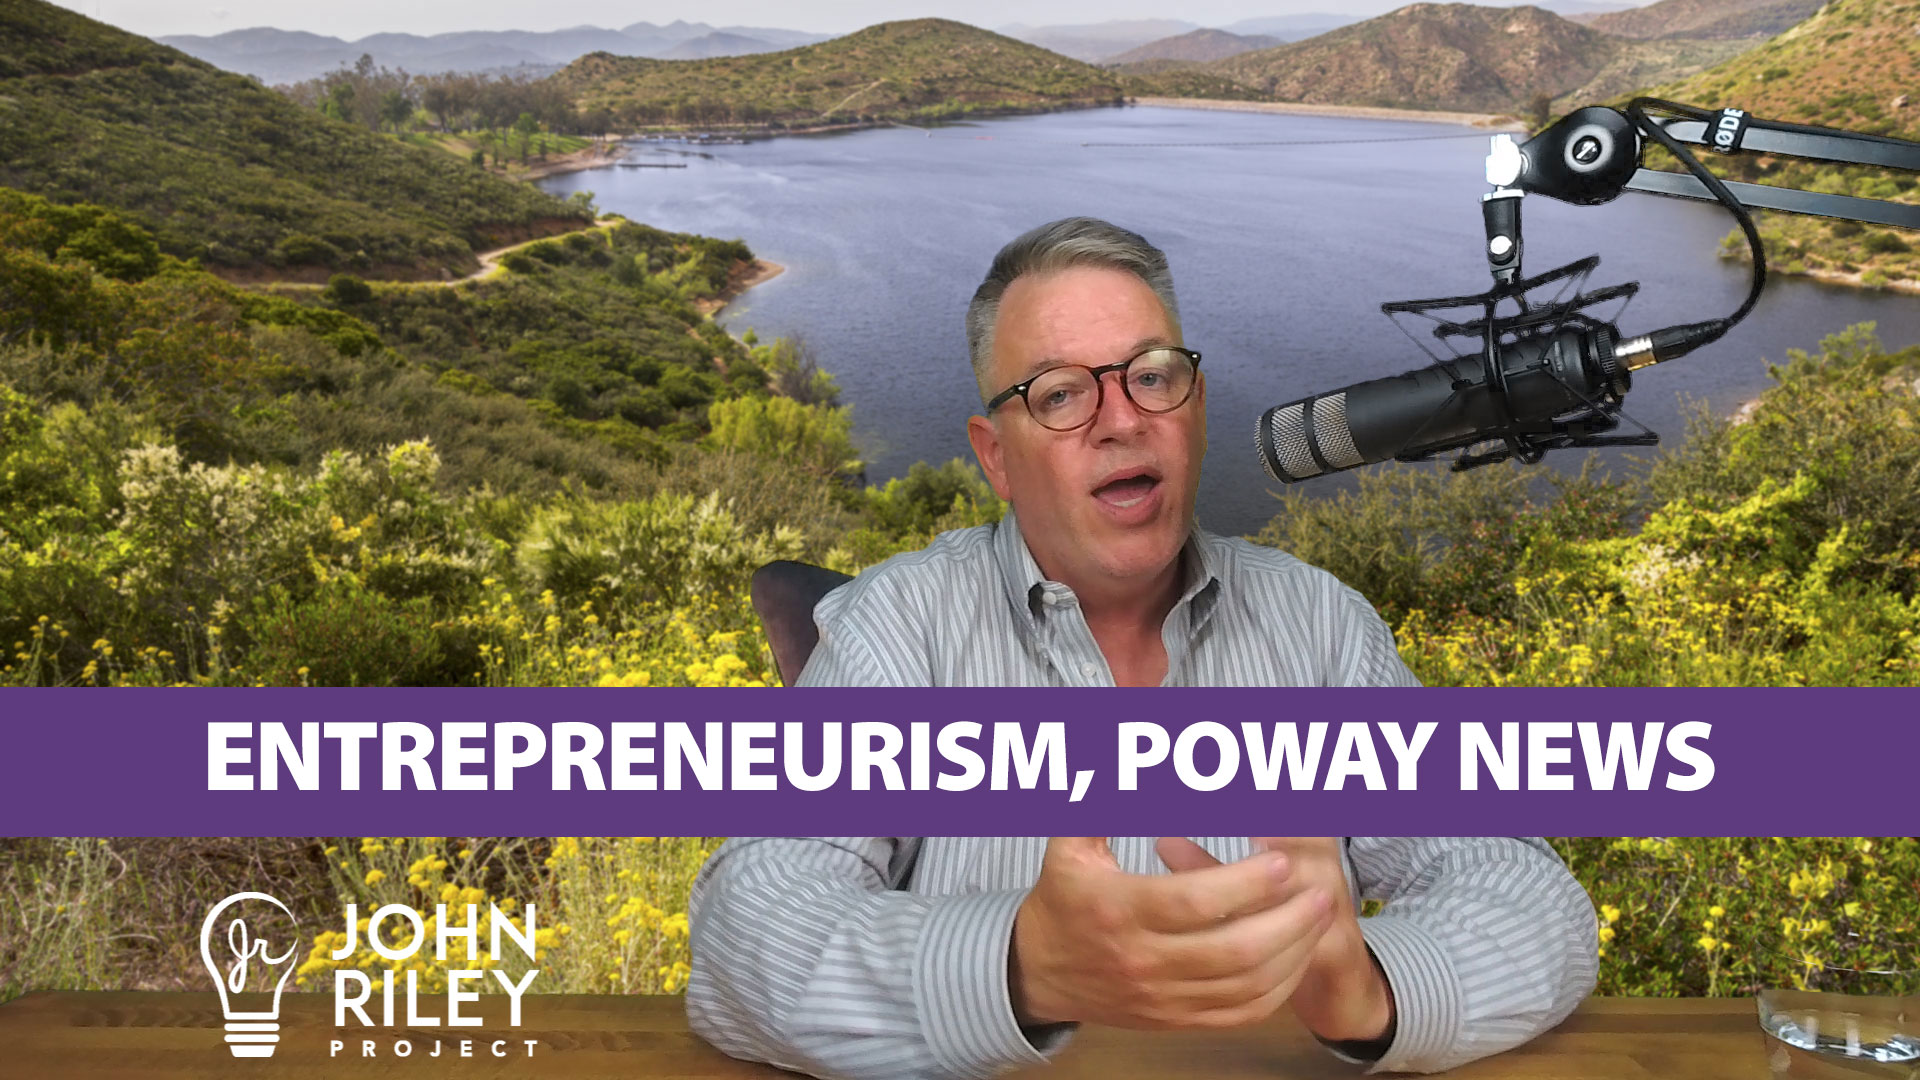 Entrepreneurism for Young People, Poway News, John Riley Project, JRP0057